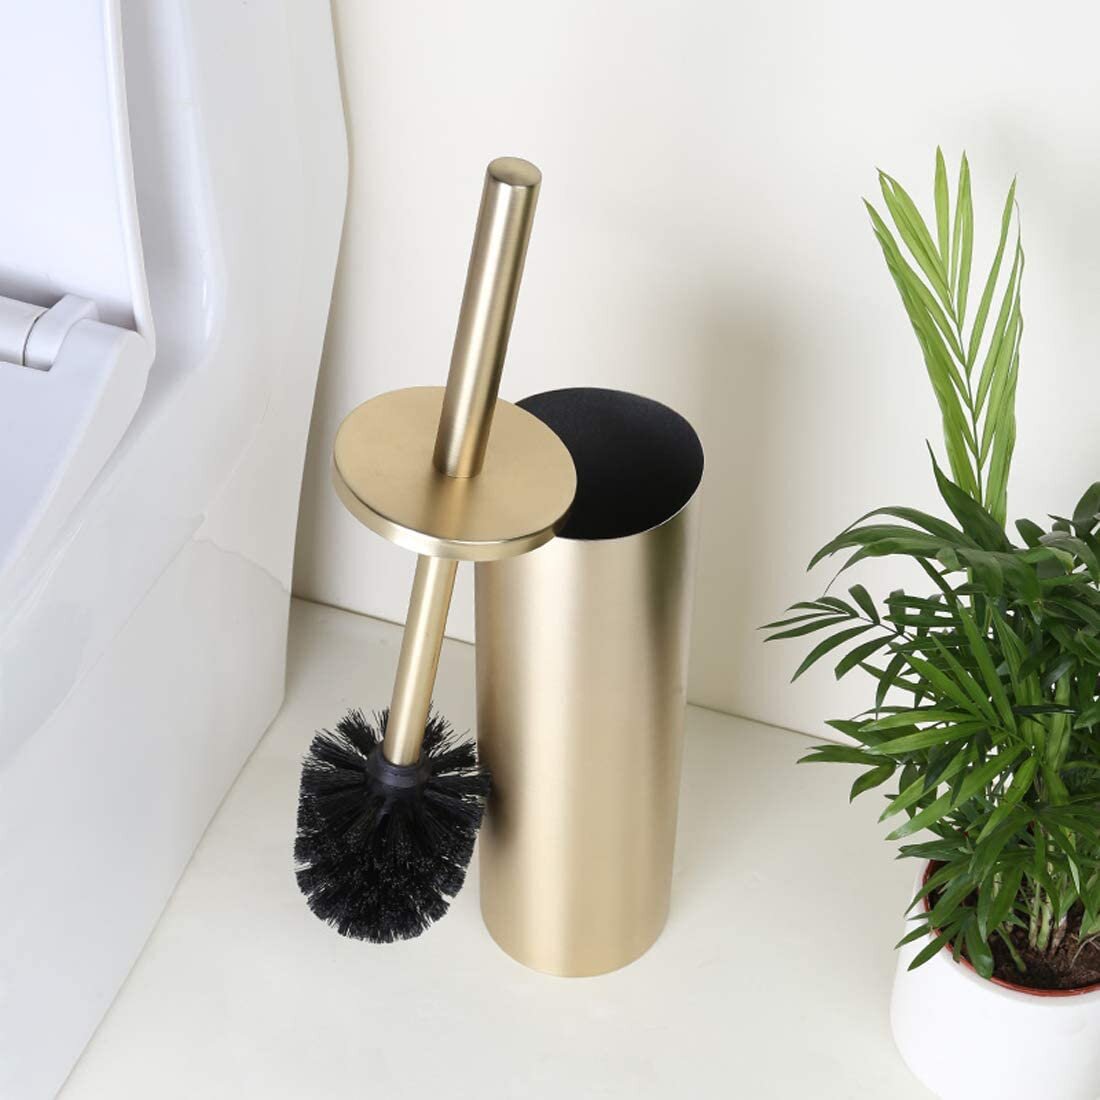 MSV Stainless Steel Toilet Brush 30 x 20 x 15 cm Brown